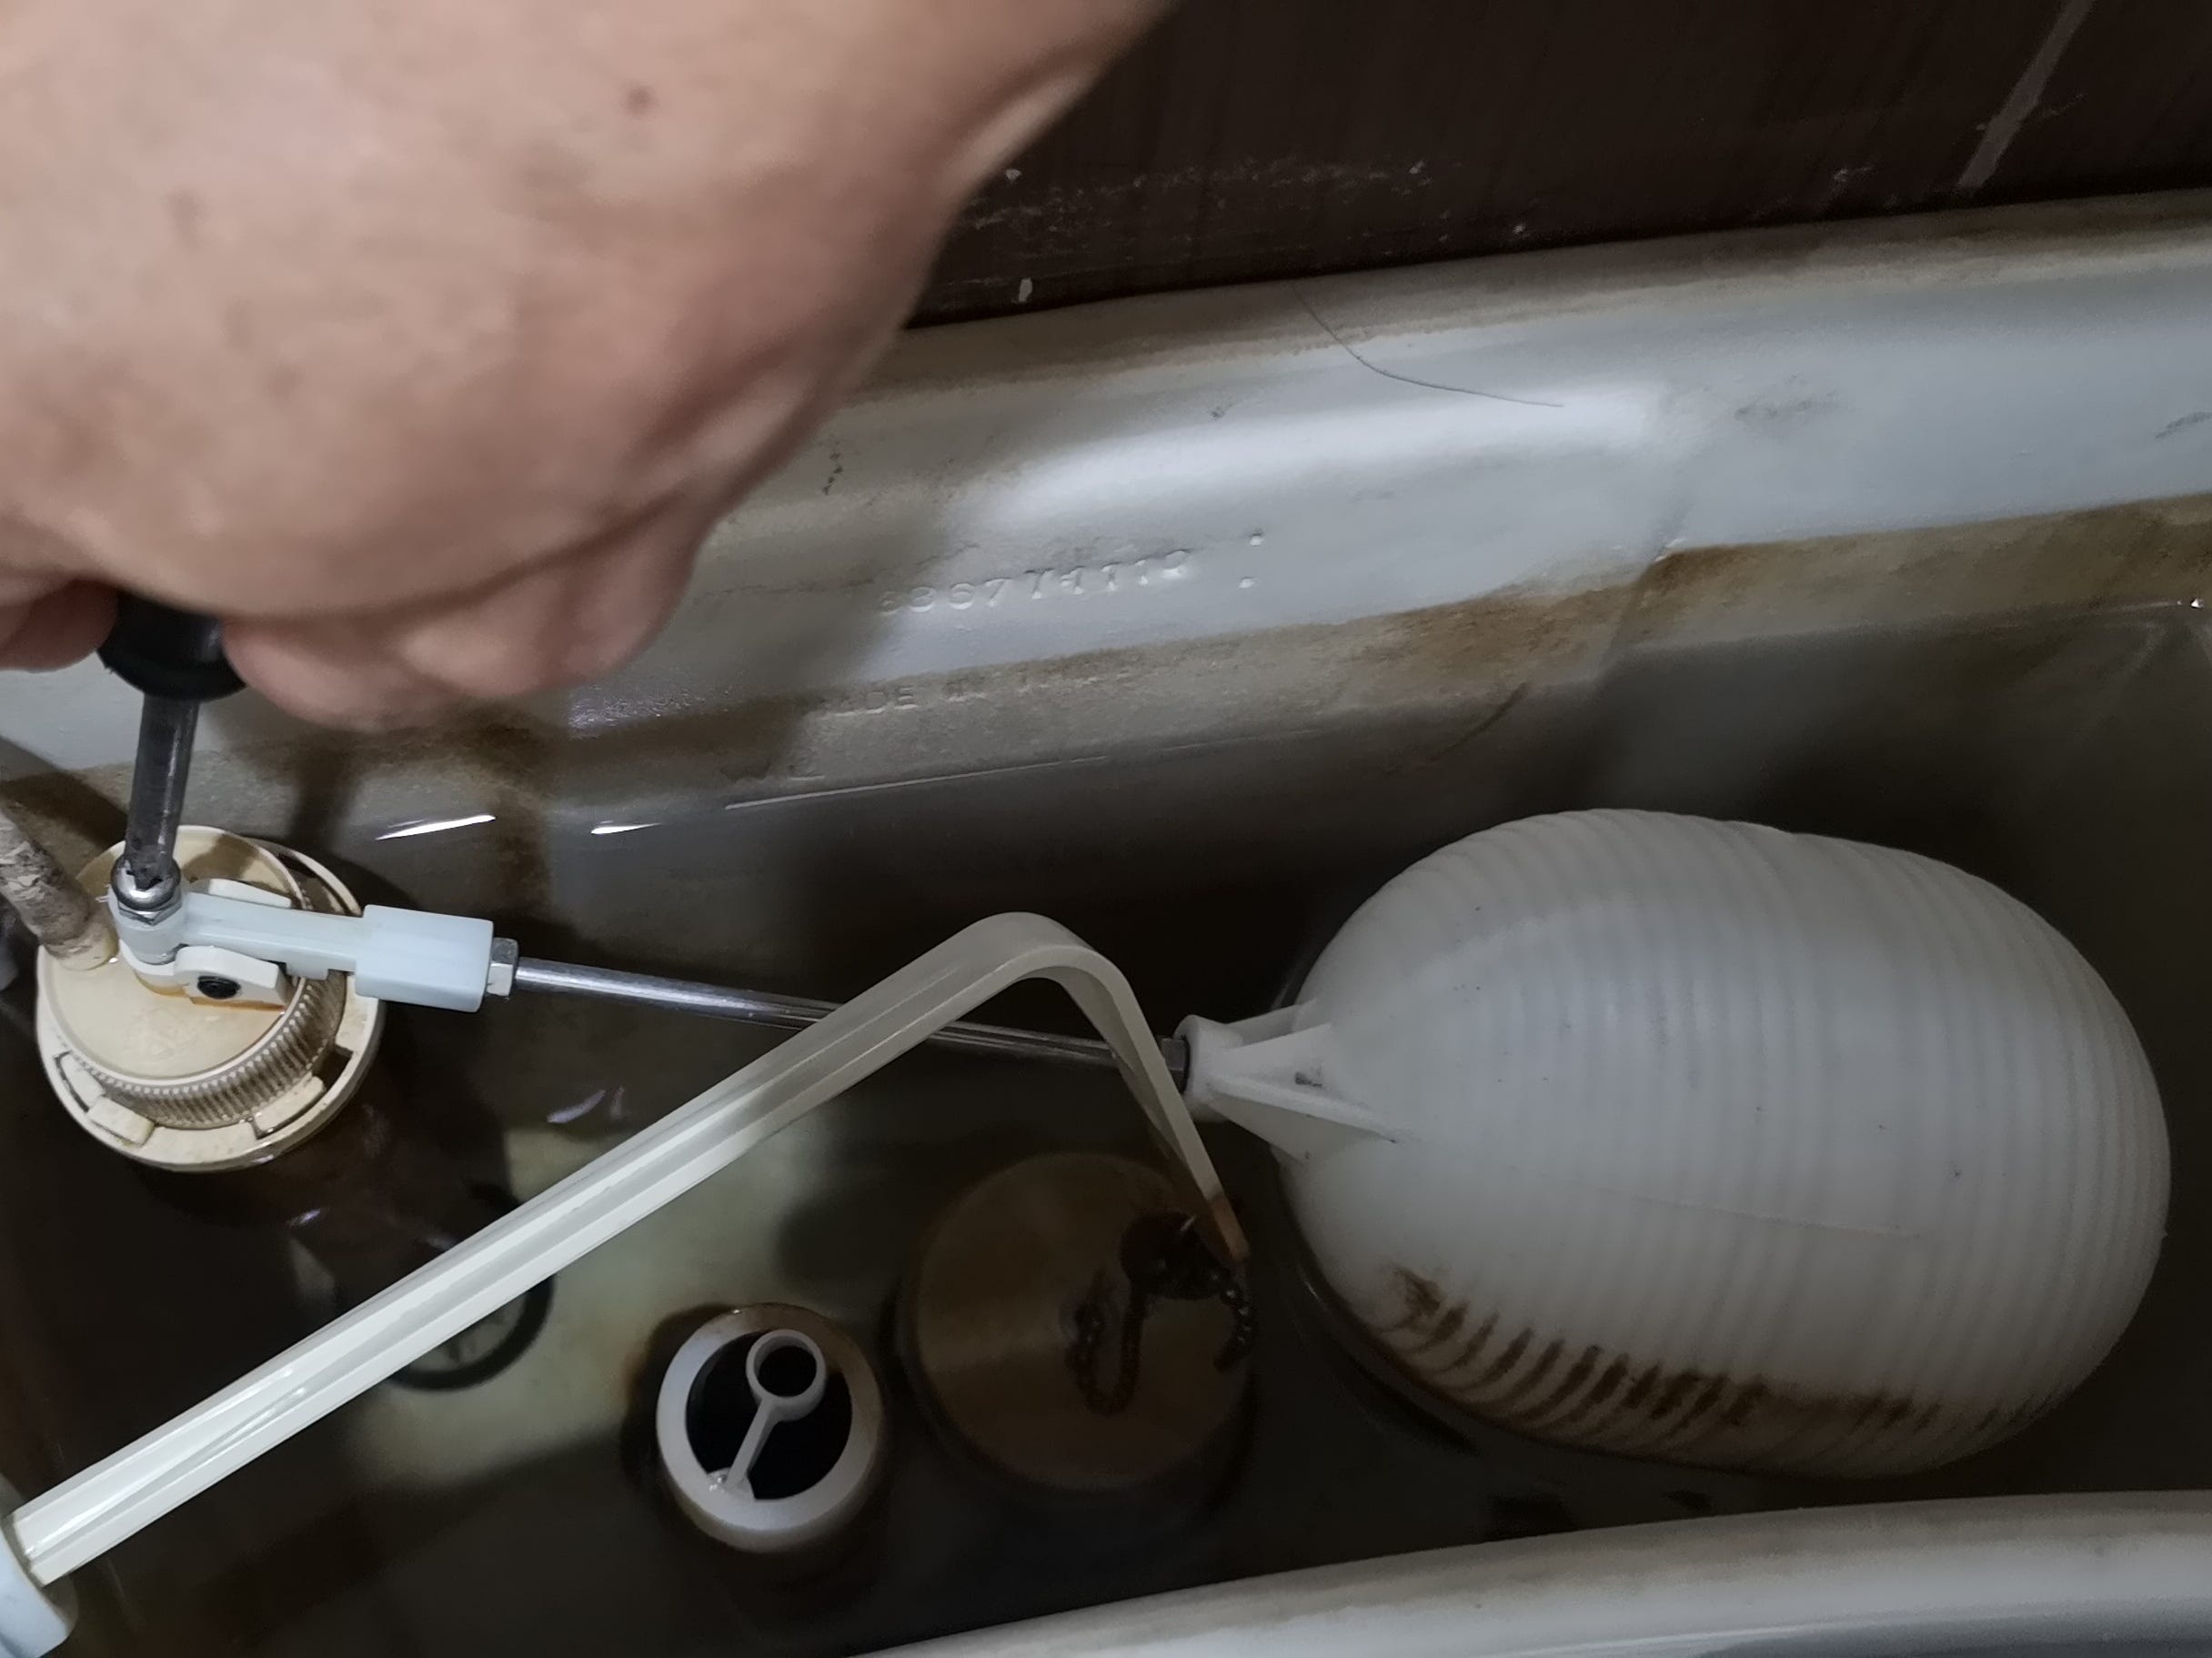 A person's hand adjusting the float in a toilet tank